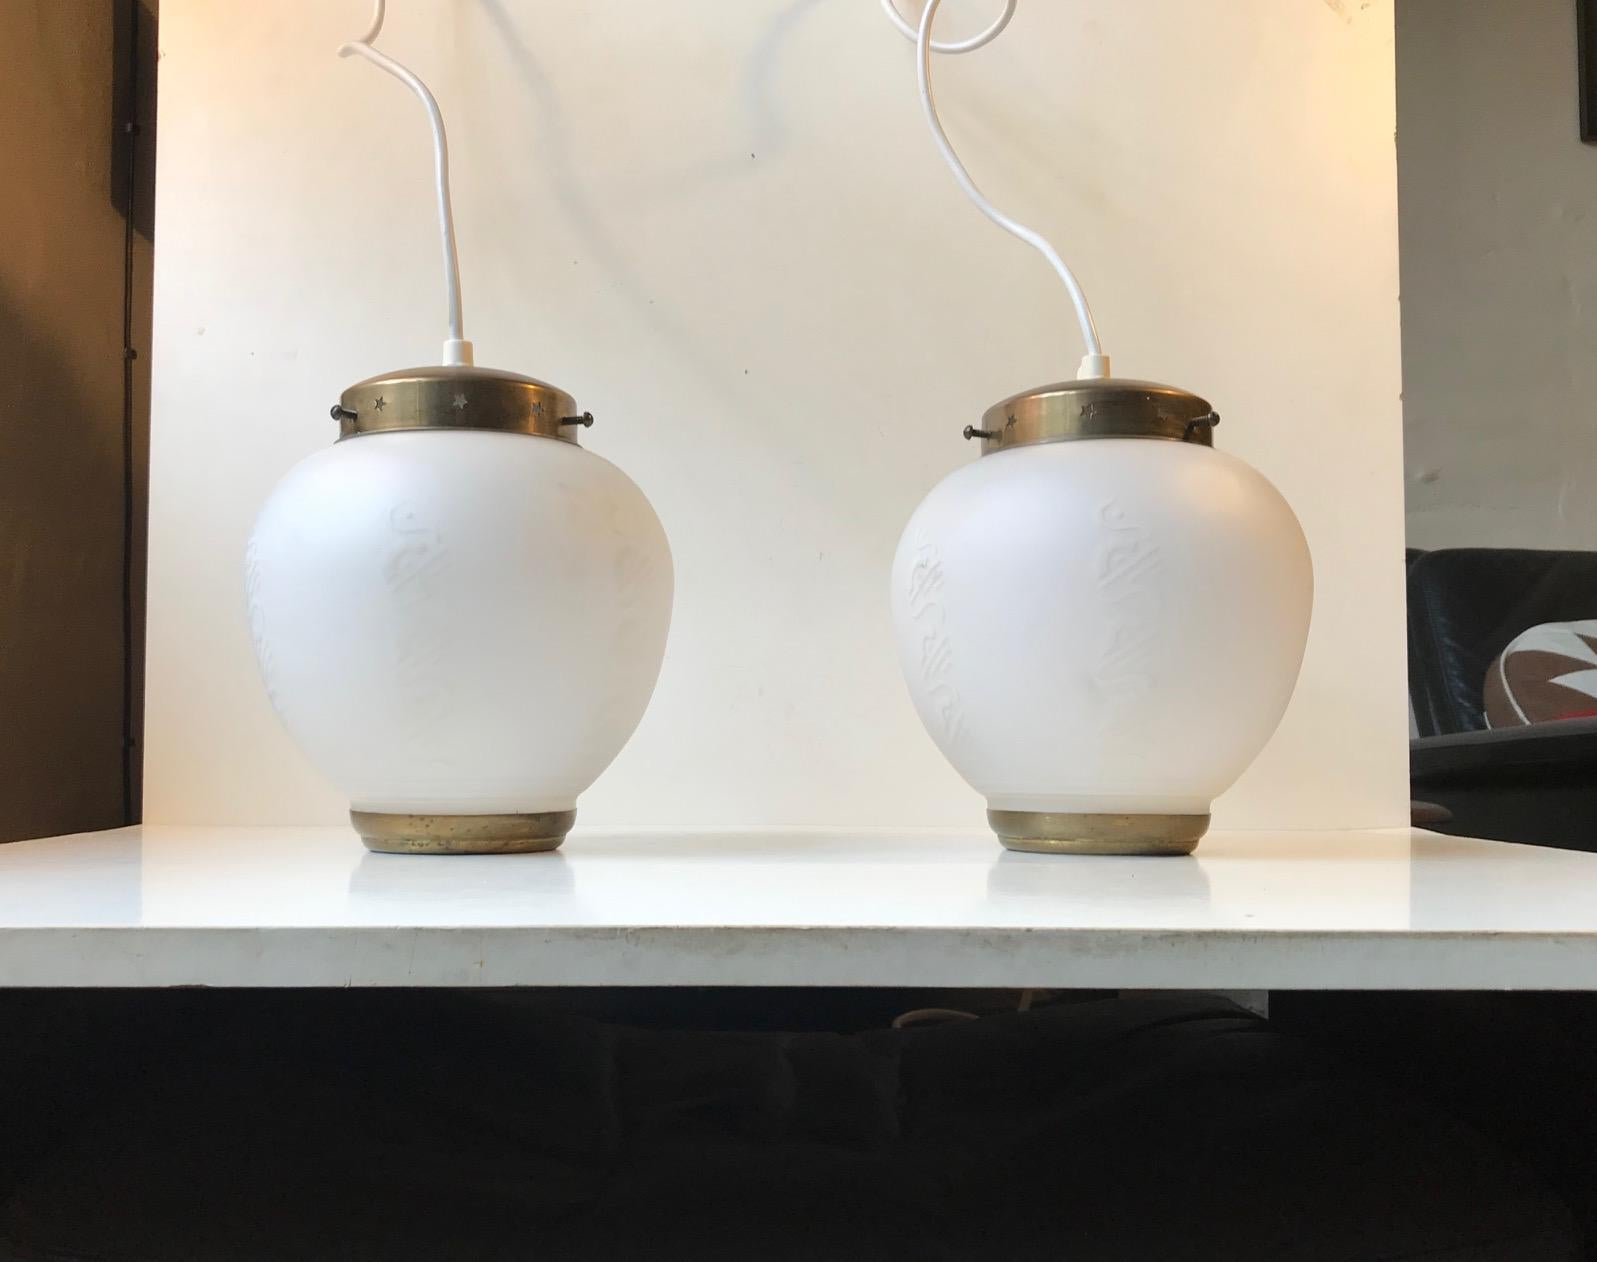 Mid-20th Century Scandinavian Modern Brass and Opaline Glass Ceiling Lamps, 1950s For Sale